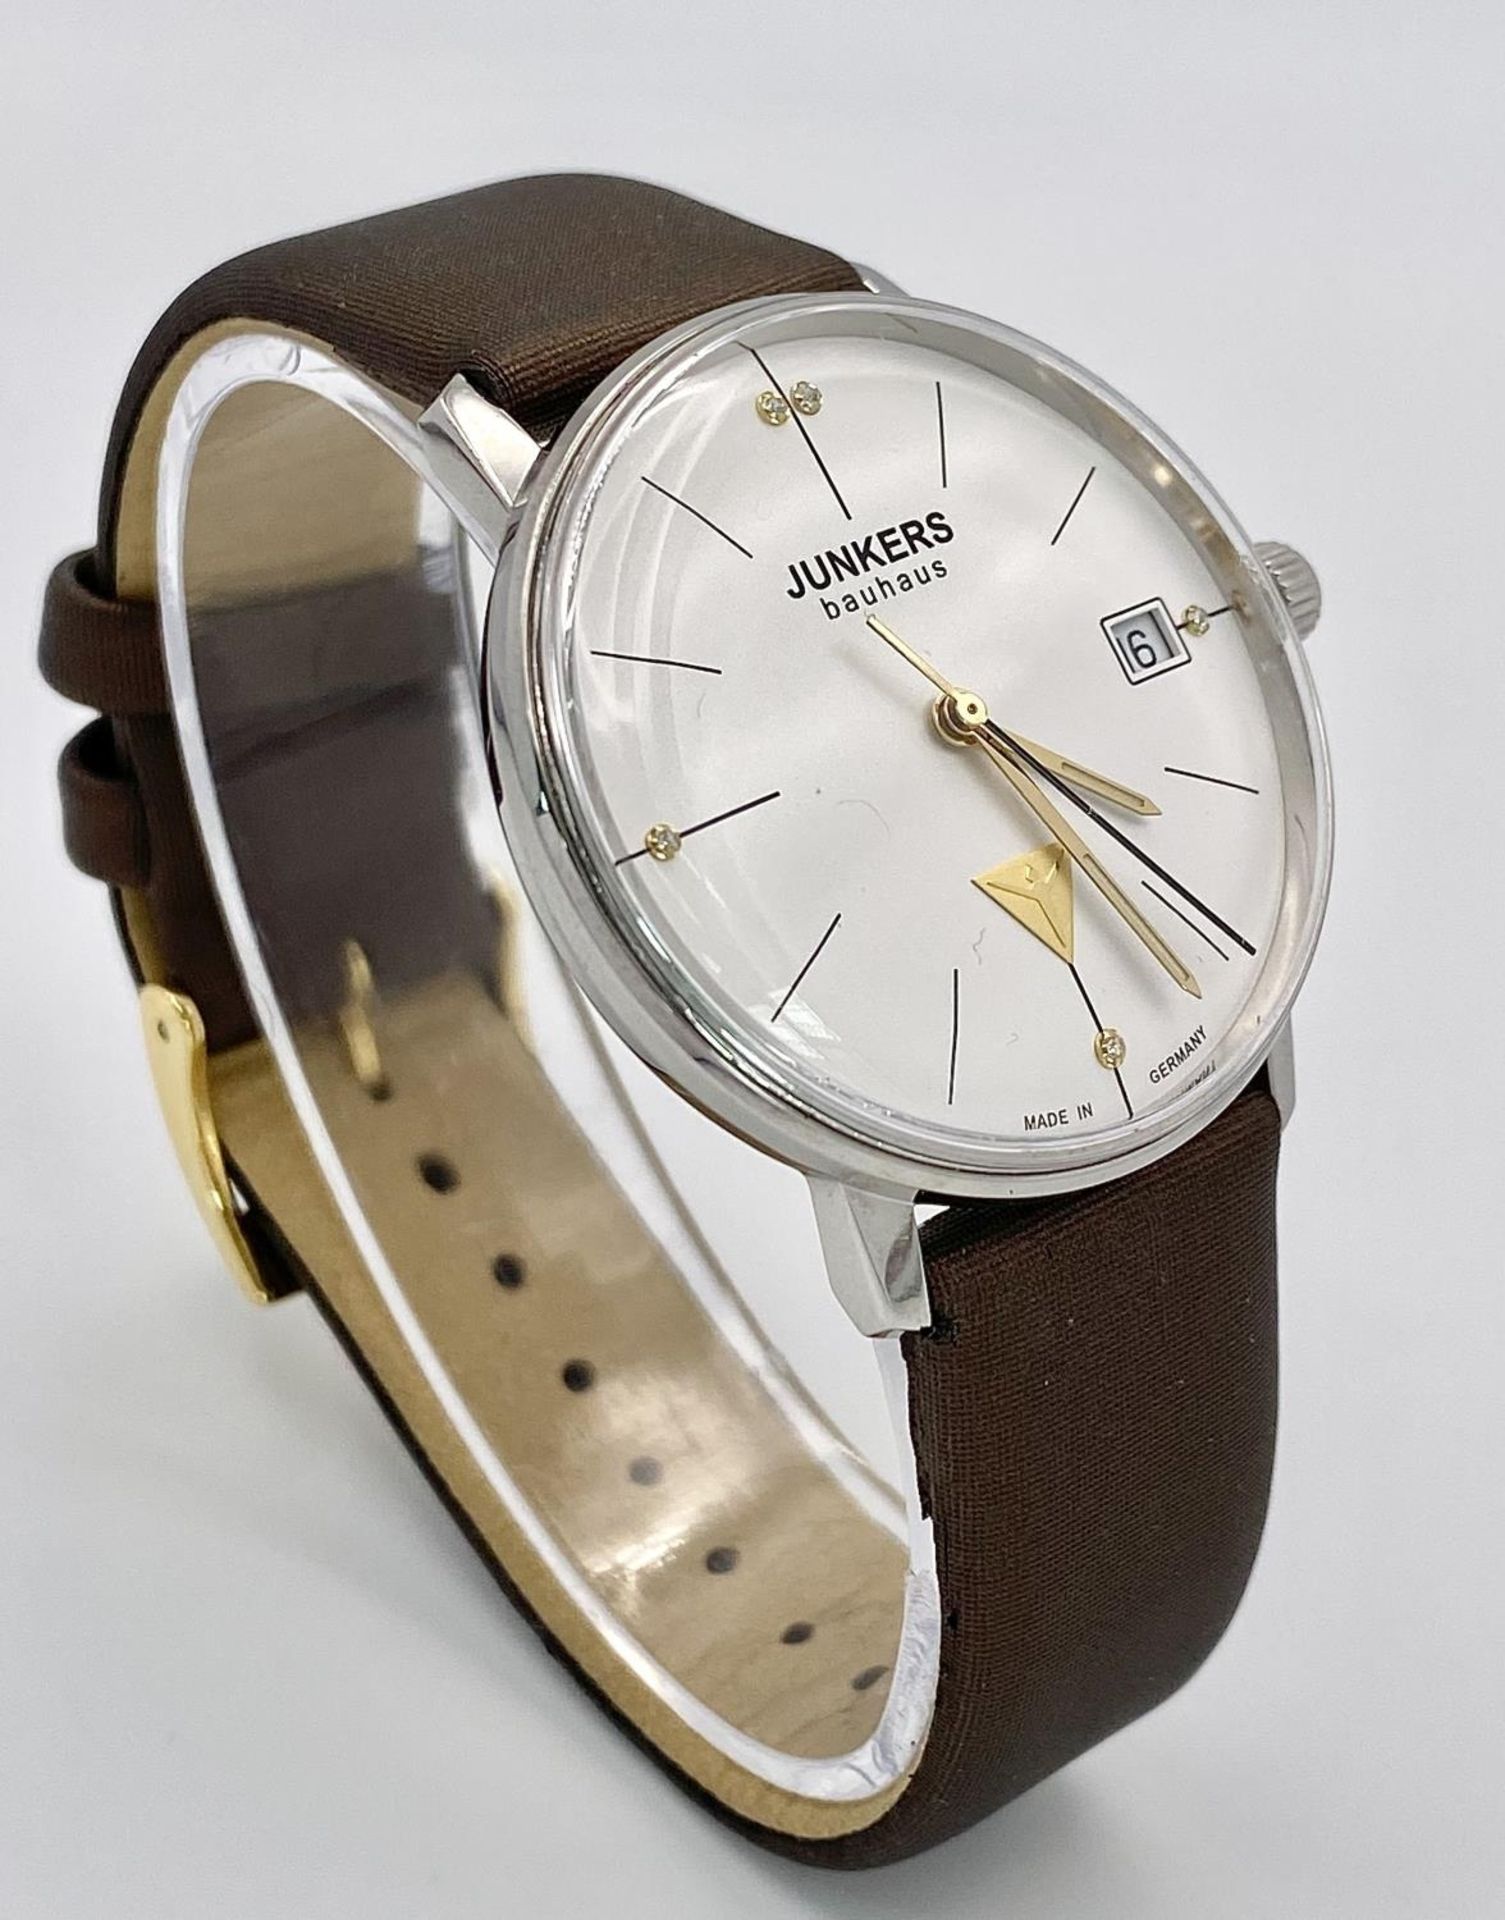 A Junkers Stylish Bauhaus Gents Quartz Watch. Brown leather strap. Stainless steel case - 35mm. - Image 4 of 8